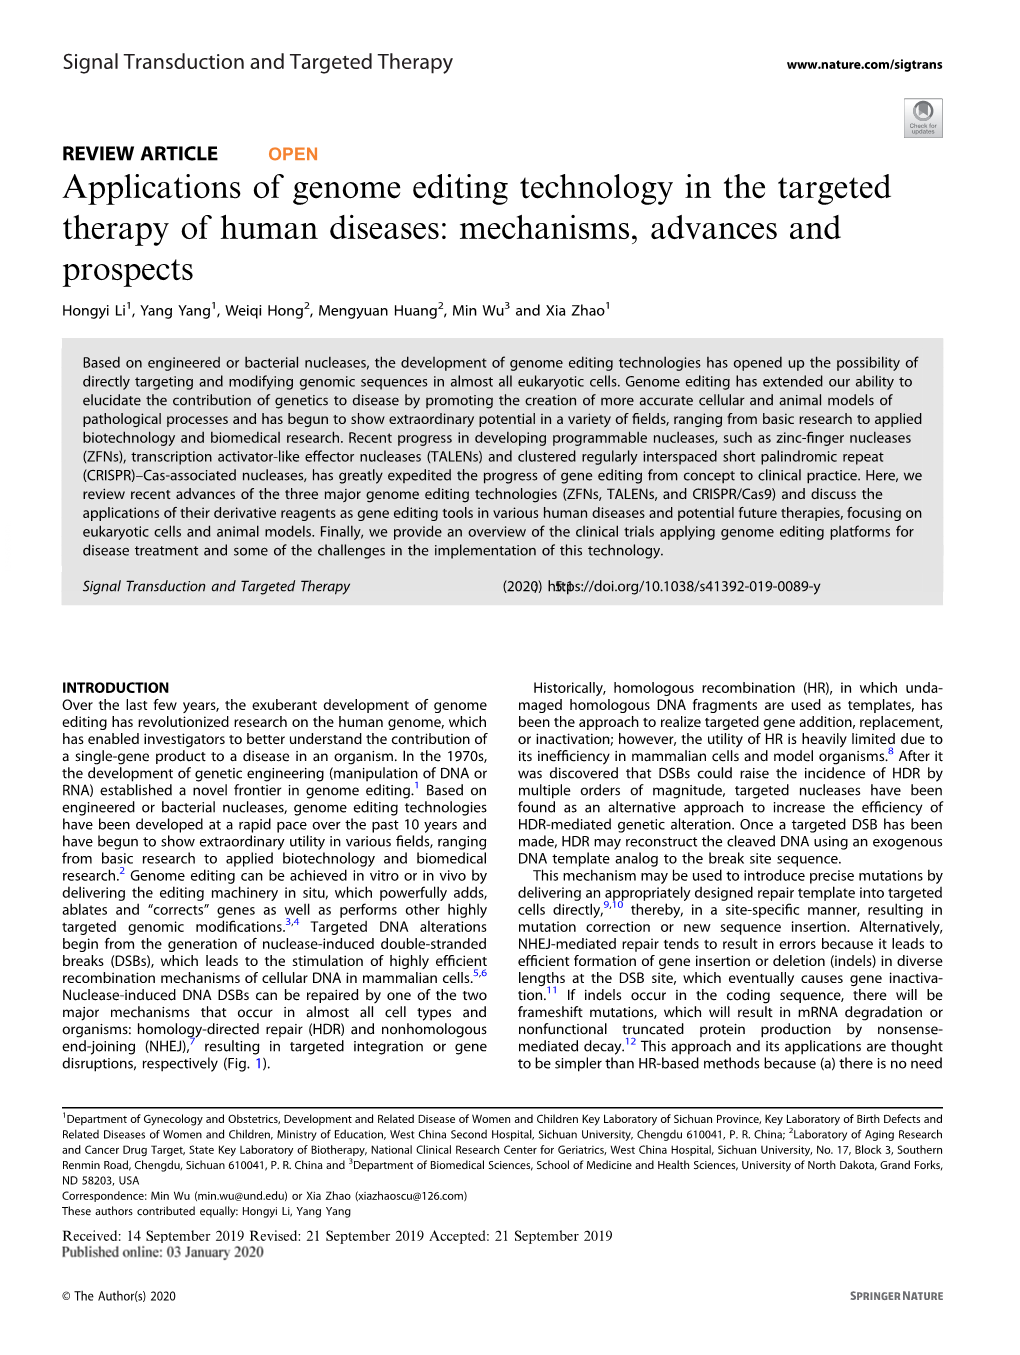 Applications of Genome Editing Technology in the Targeted Therapy of Human Diseases: Mechanisms, Advances and Prospects